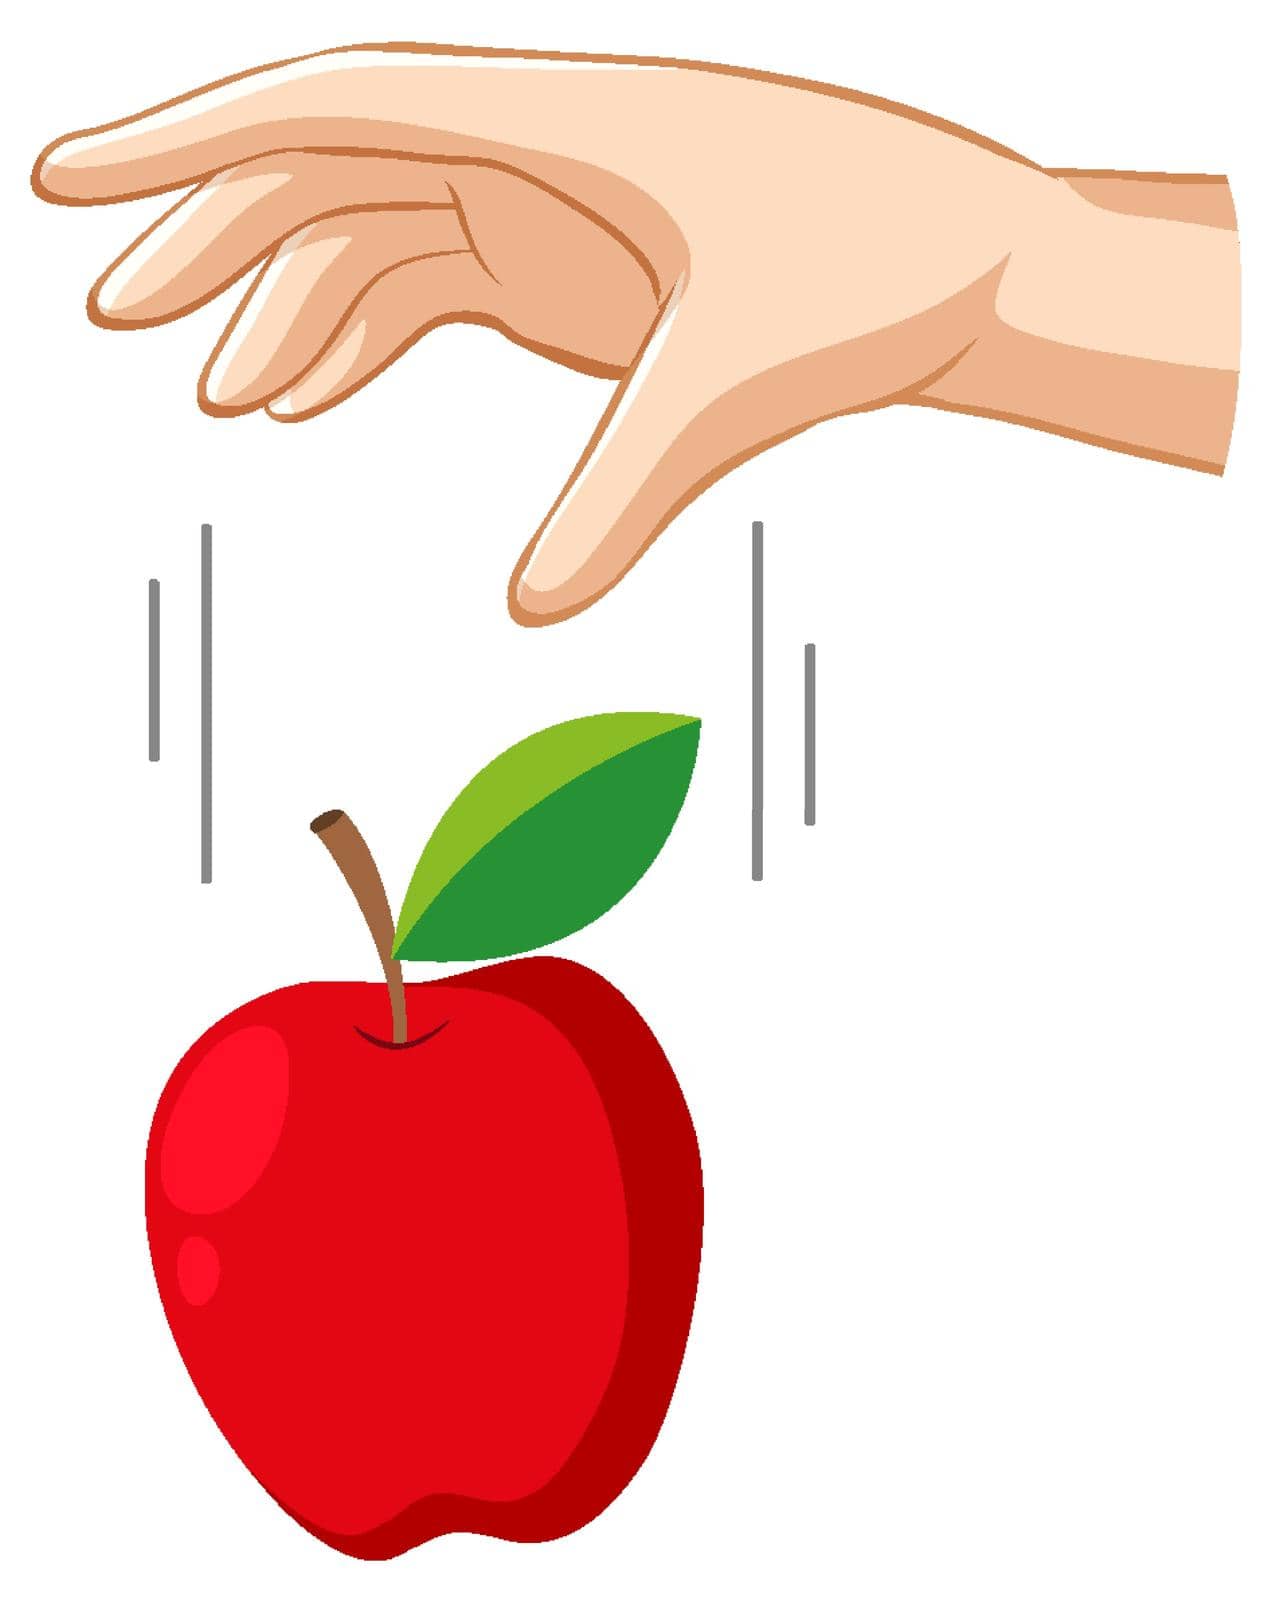 Hand dropping an apple for gravity experiment by iimages